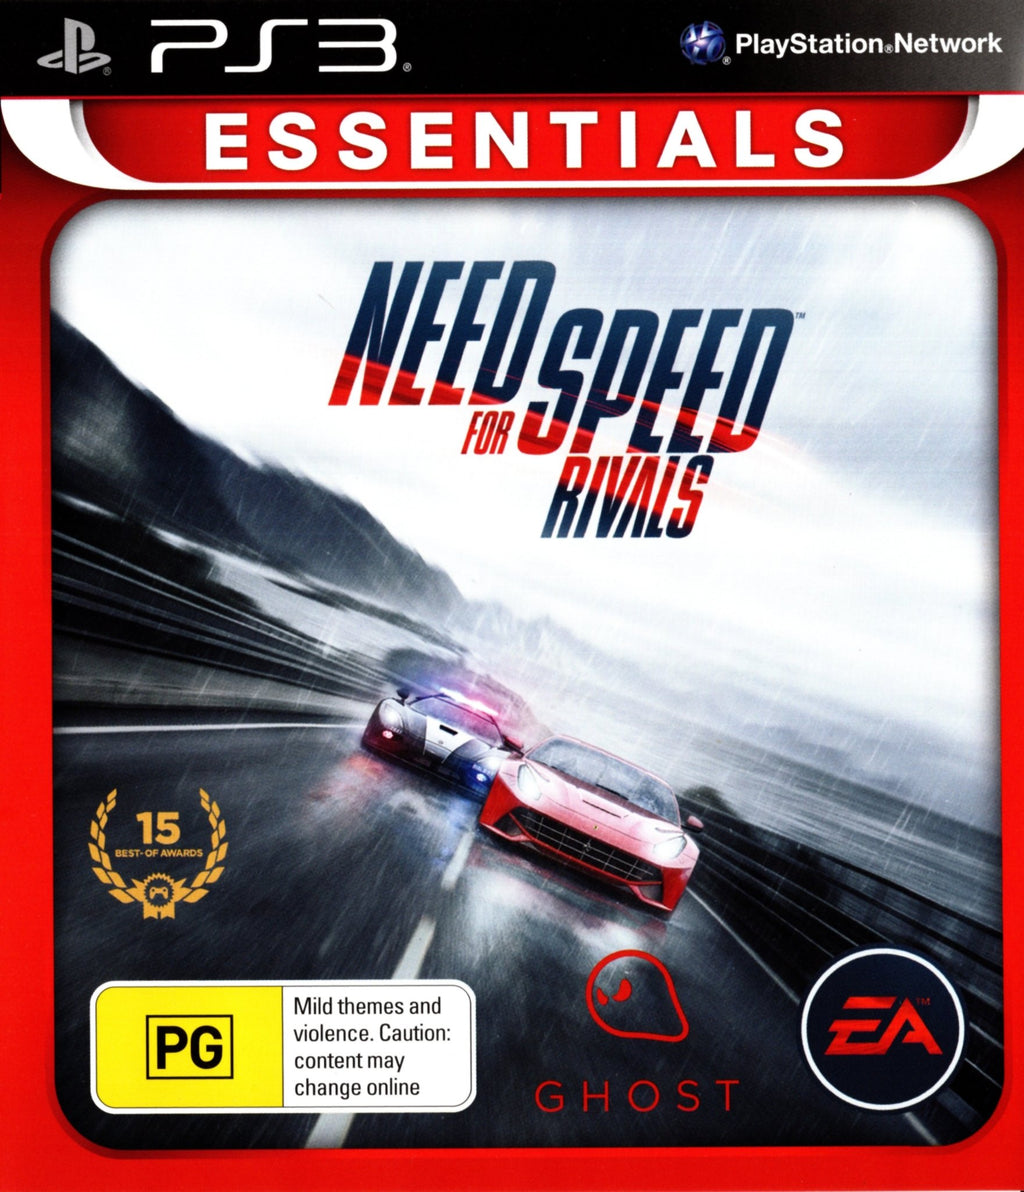 Replacement Case ONLY for NEED FOR SPEED RIVALS PLAYSTATION 3 PS3 